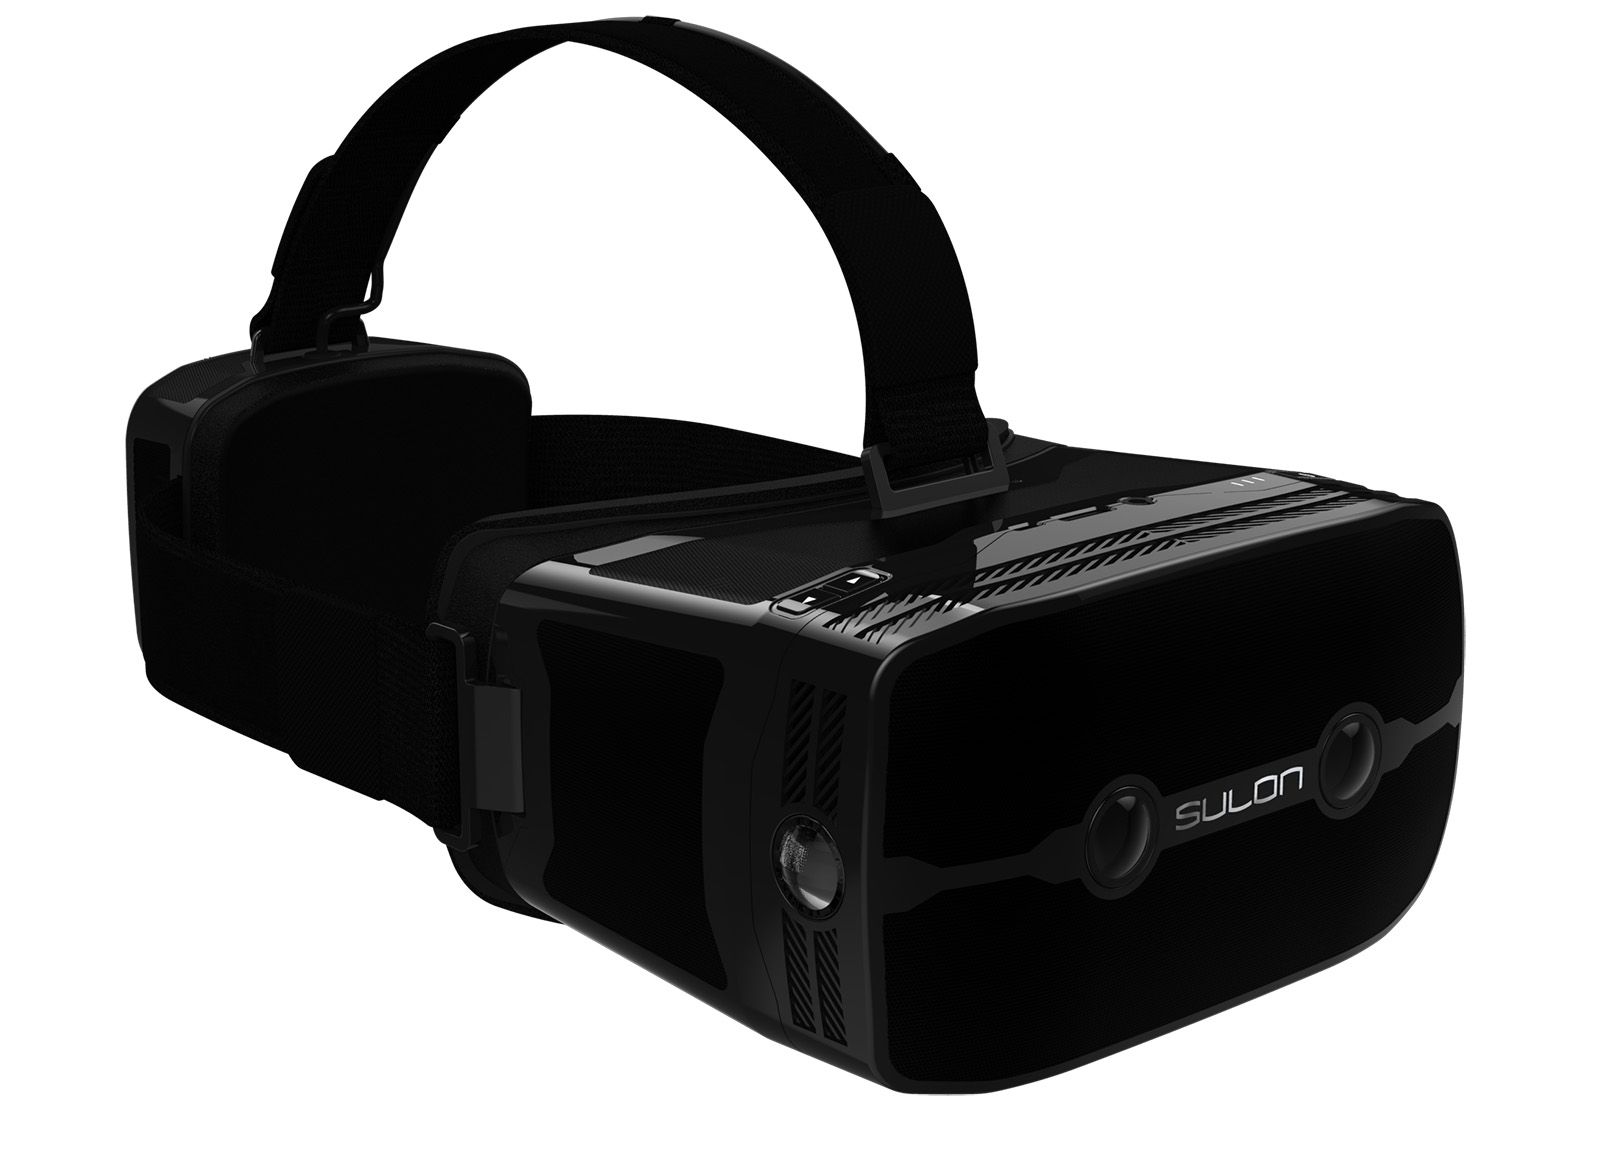 forget oculus rift and htc vive wire free sulon q vr doesn’t need a high end pc image 1